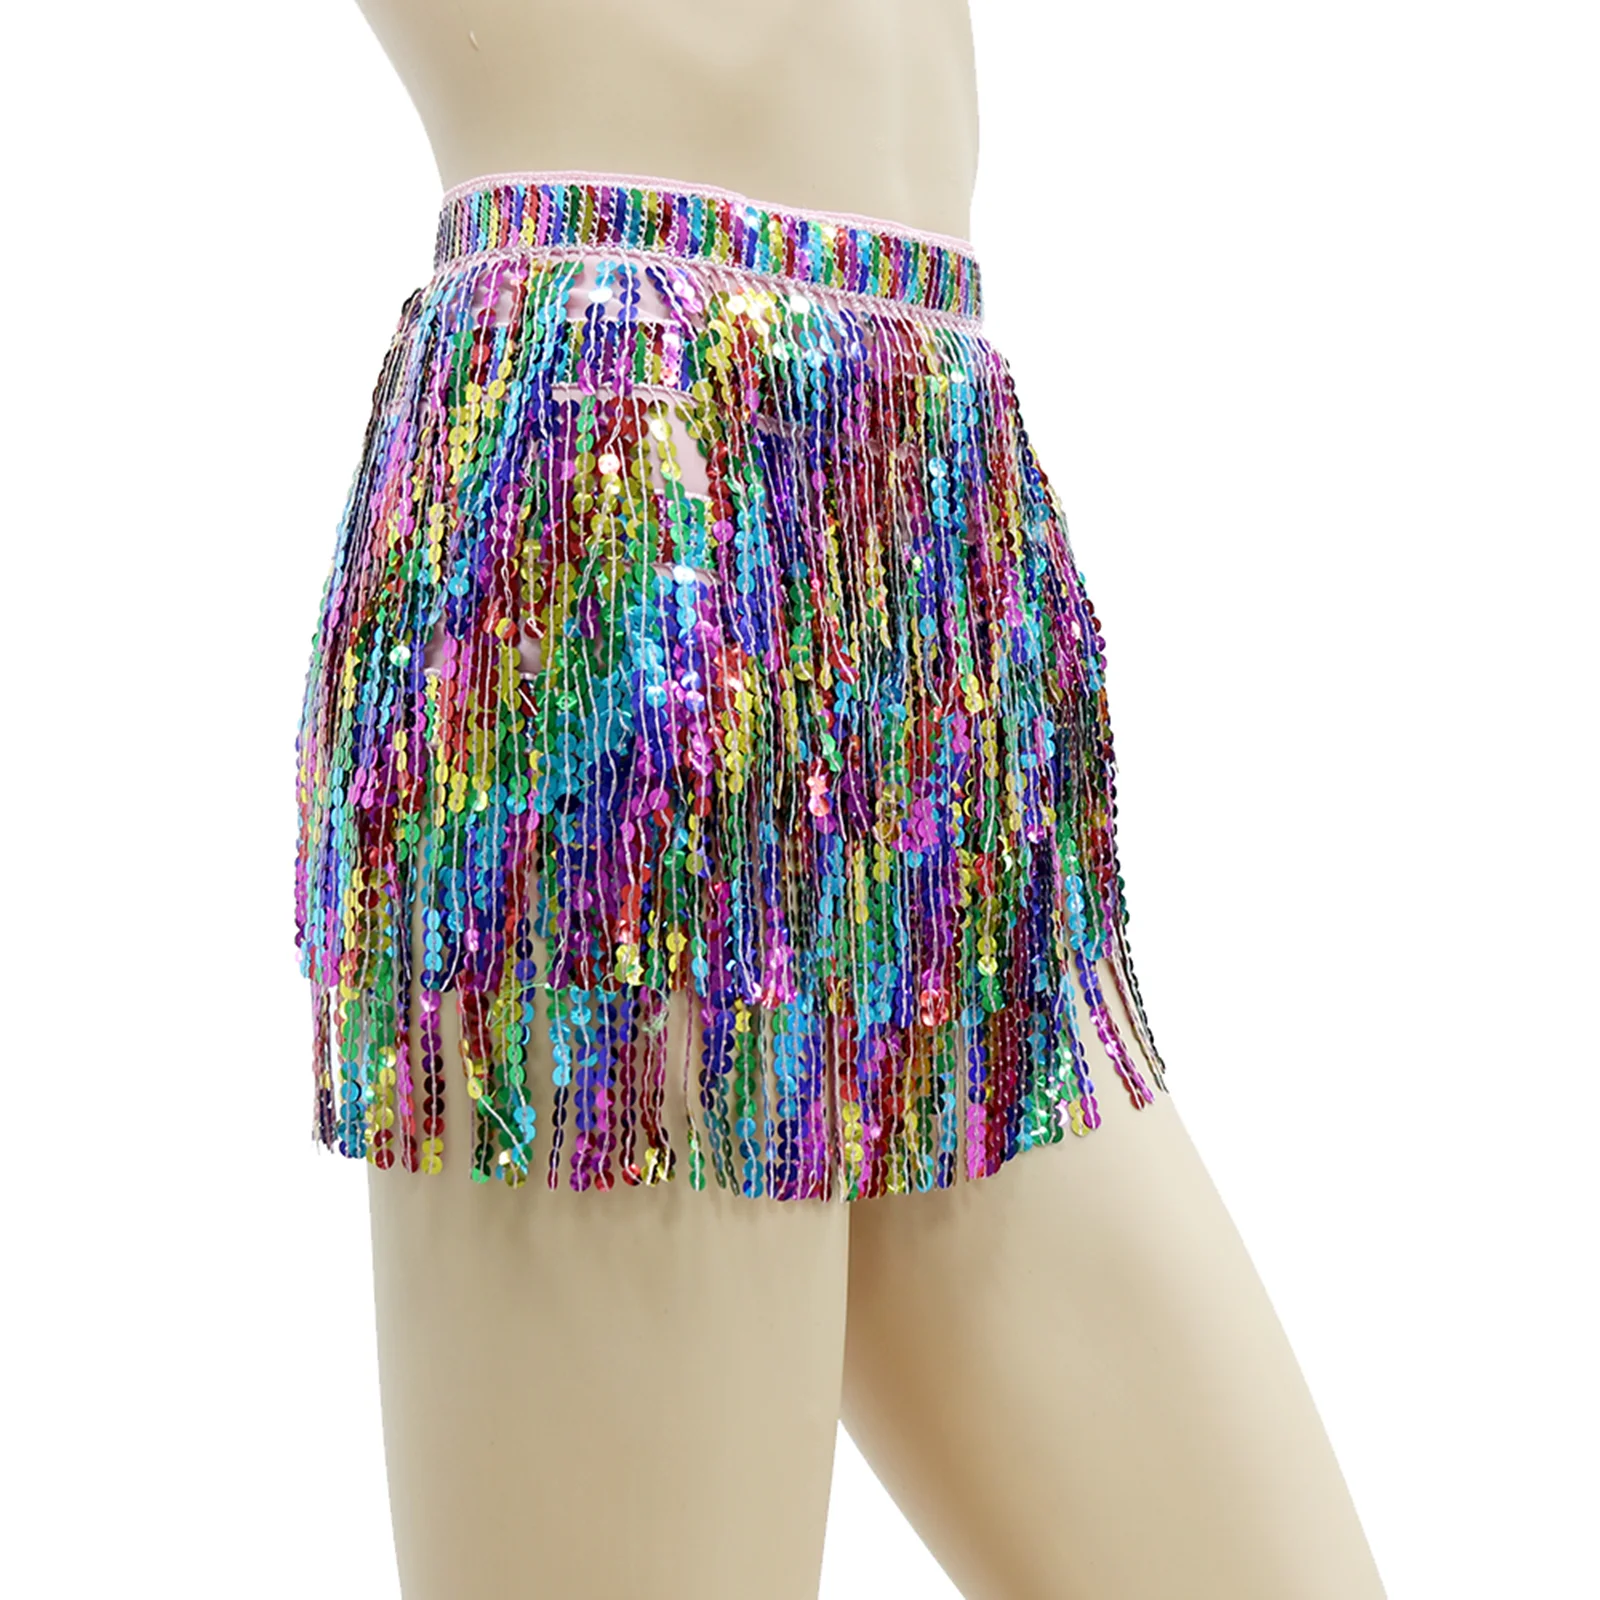 Dance Performance Skirt Rave Party Dance Performance Costume Boho Belly Skirt for Summer Beach Carnival Stage Clubwear Cosplay